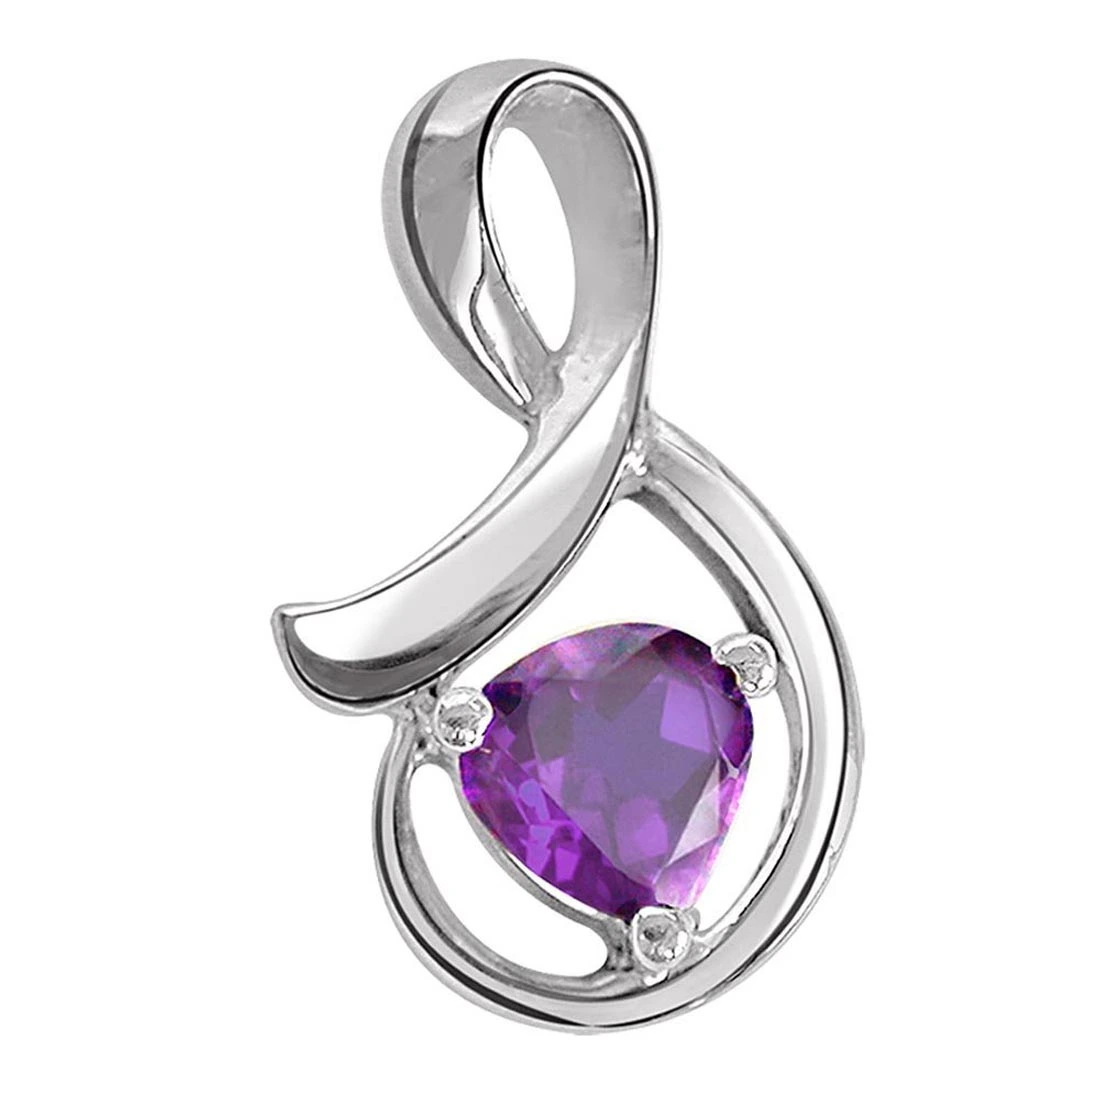 Heart Shaped Amethyst & Sterling Silver Pendant for Girls (SDS67)